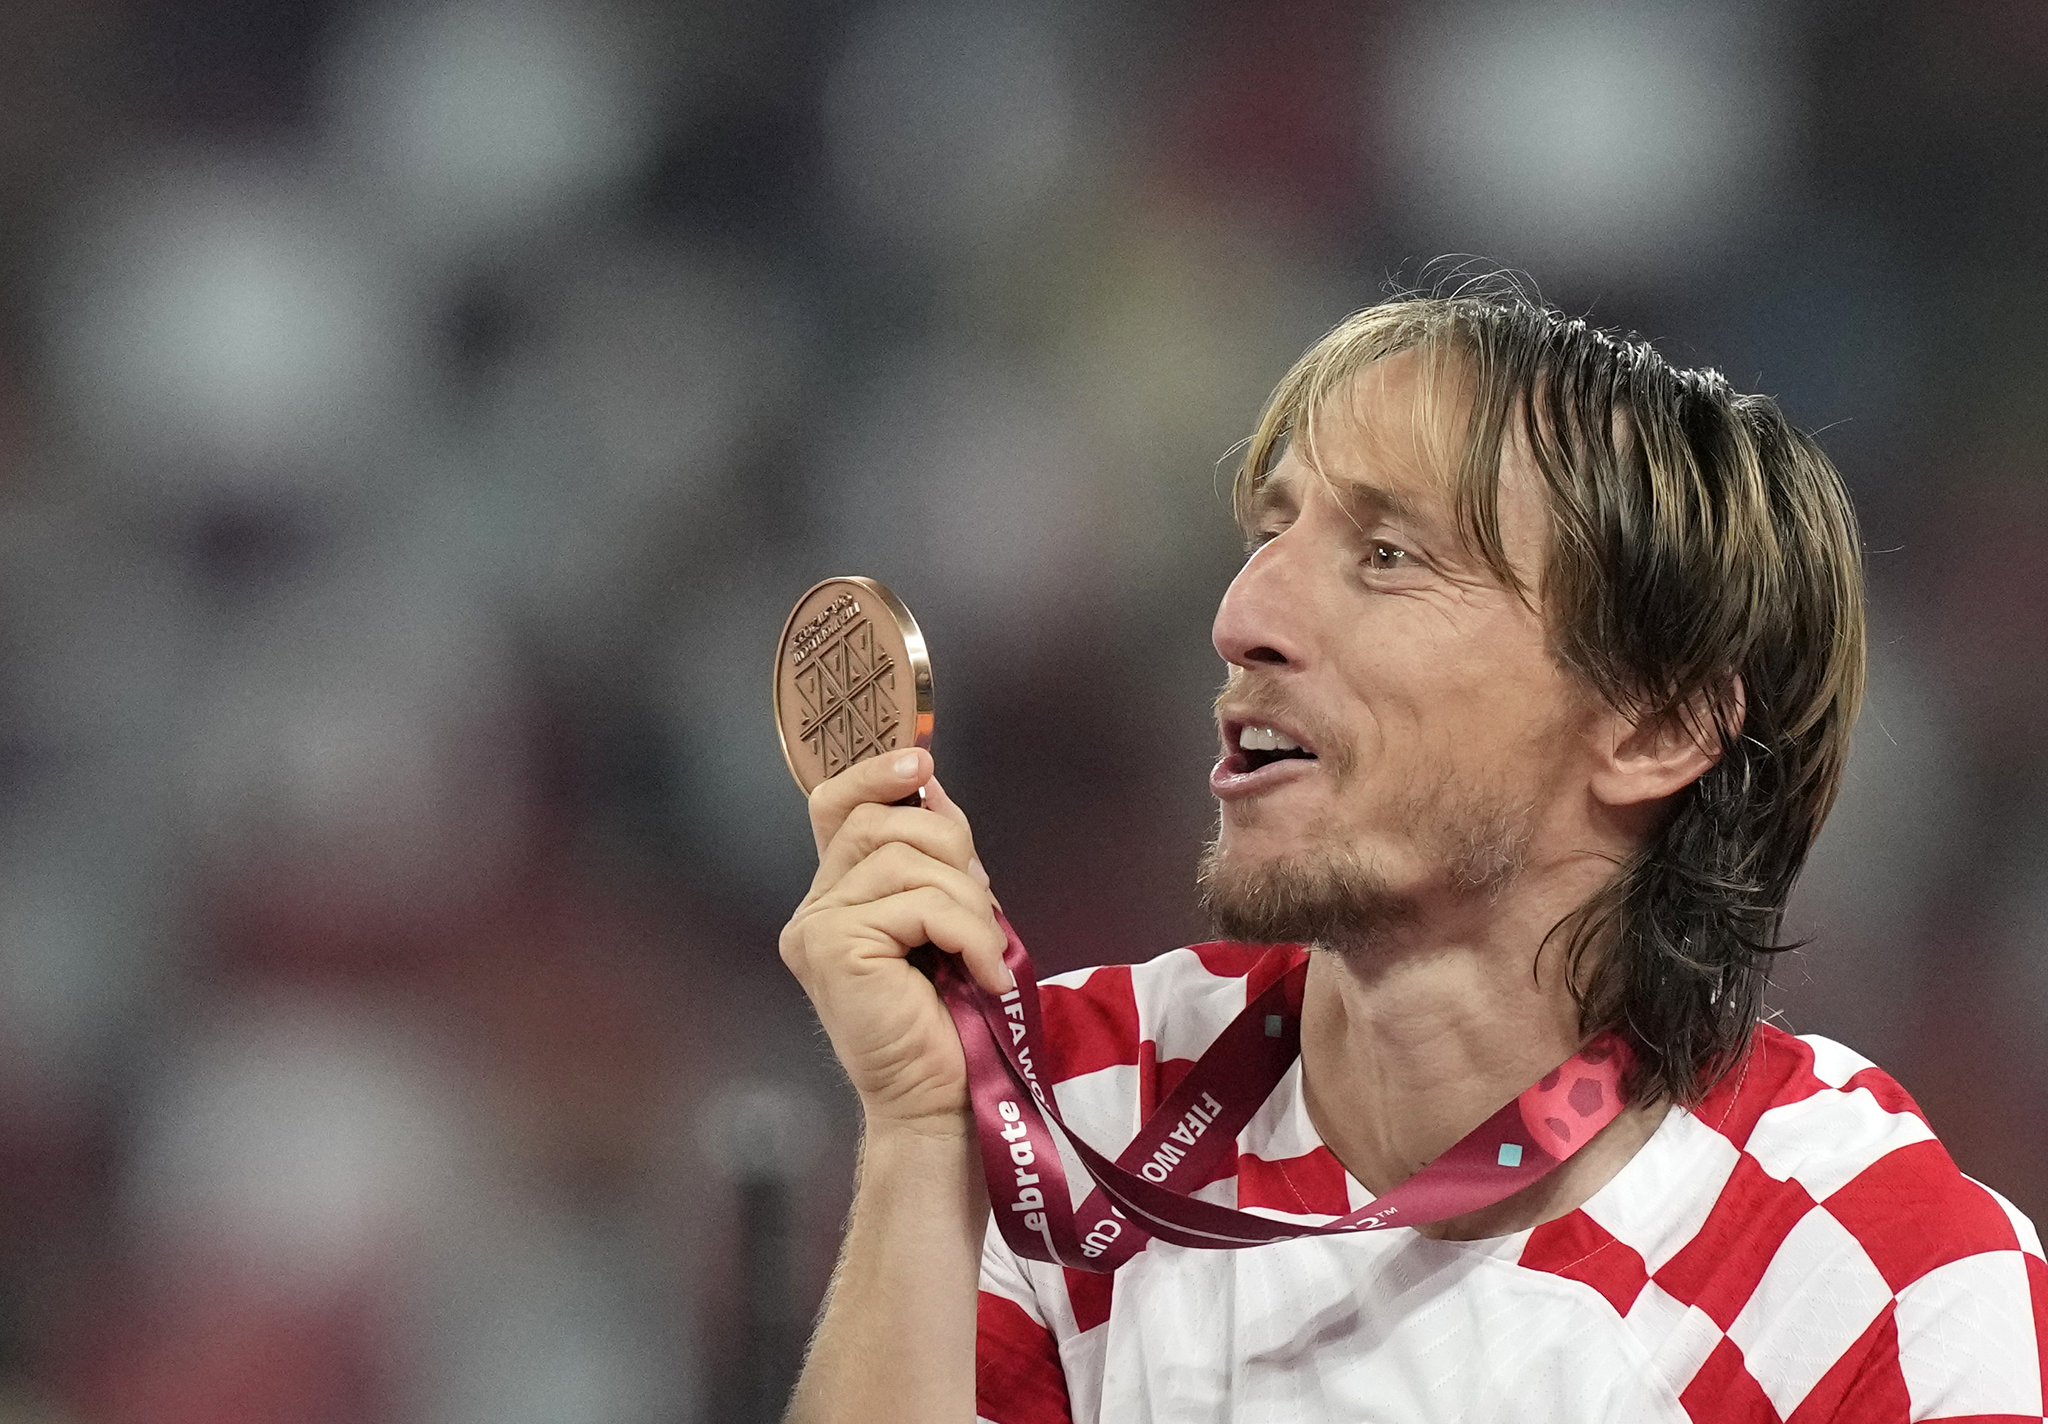 Modric and his bronze medal.